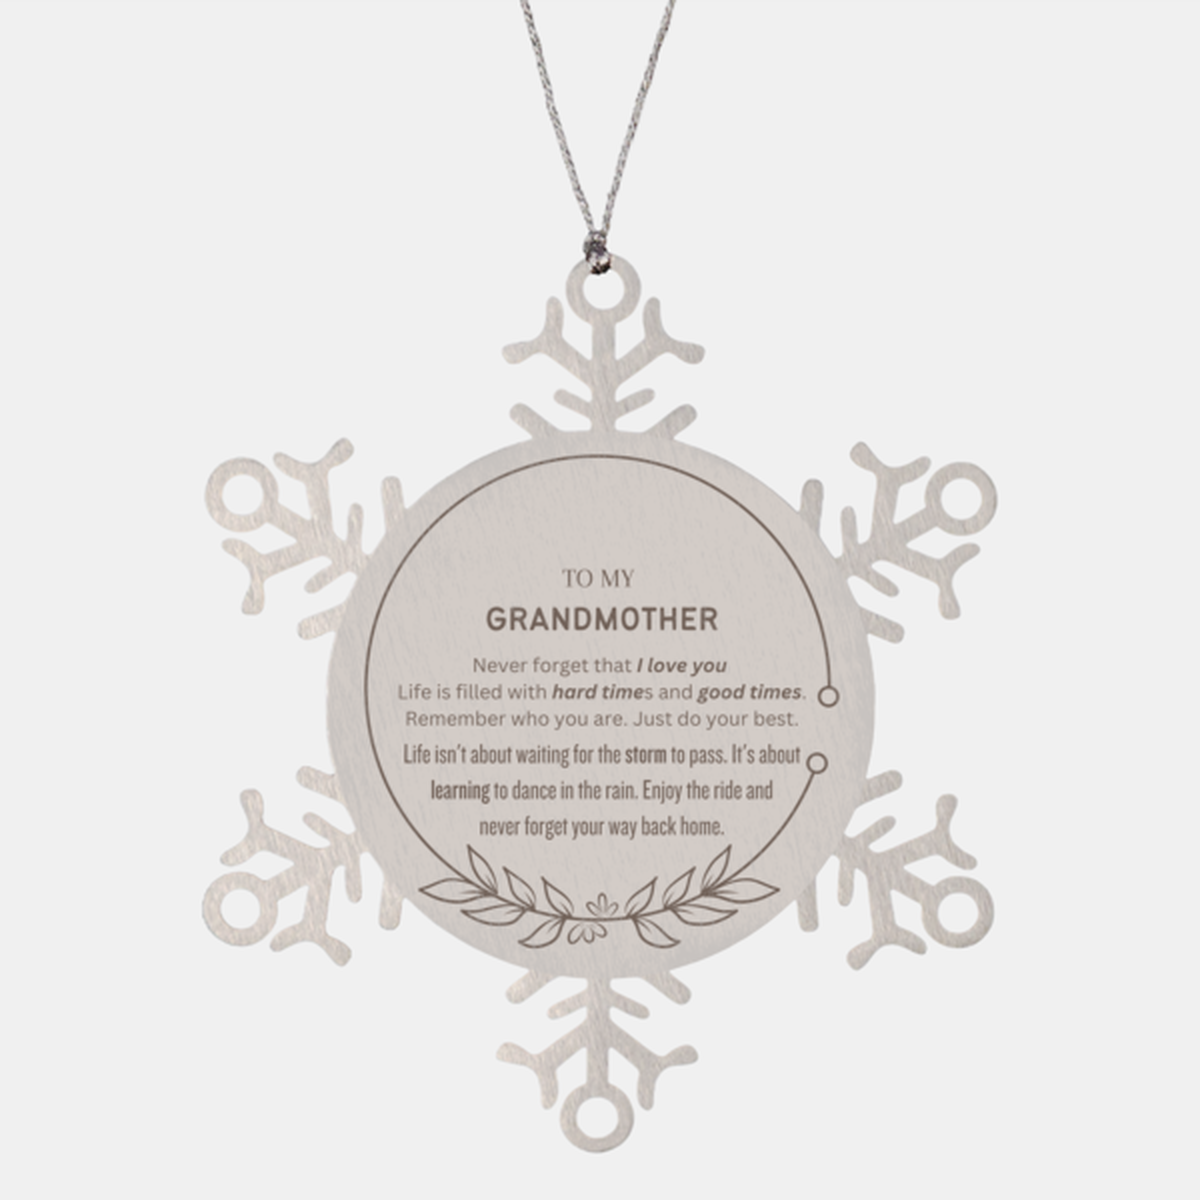 Christmas Grandmother Snowflake Ornament Gifts, To My Grandmother Thank You Gifts For Grandmother, Xmas Decorations Unique Gifts For Grandmother To My Grandmother Never forget that I love you life is filled with hard times and good times. Remember who you